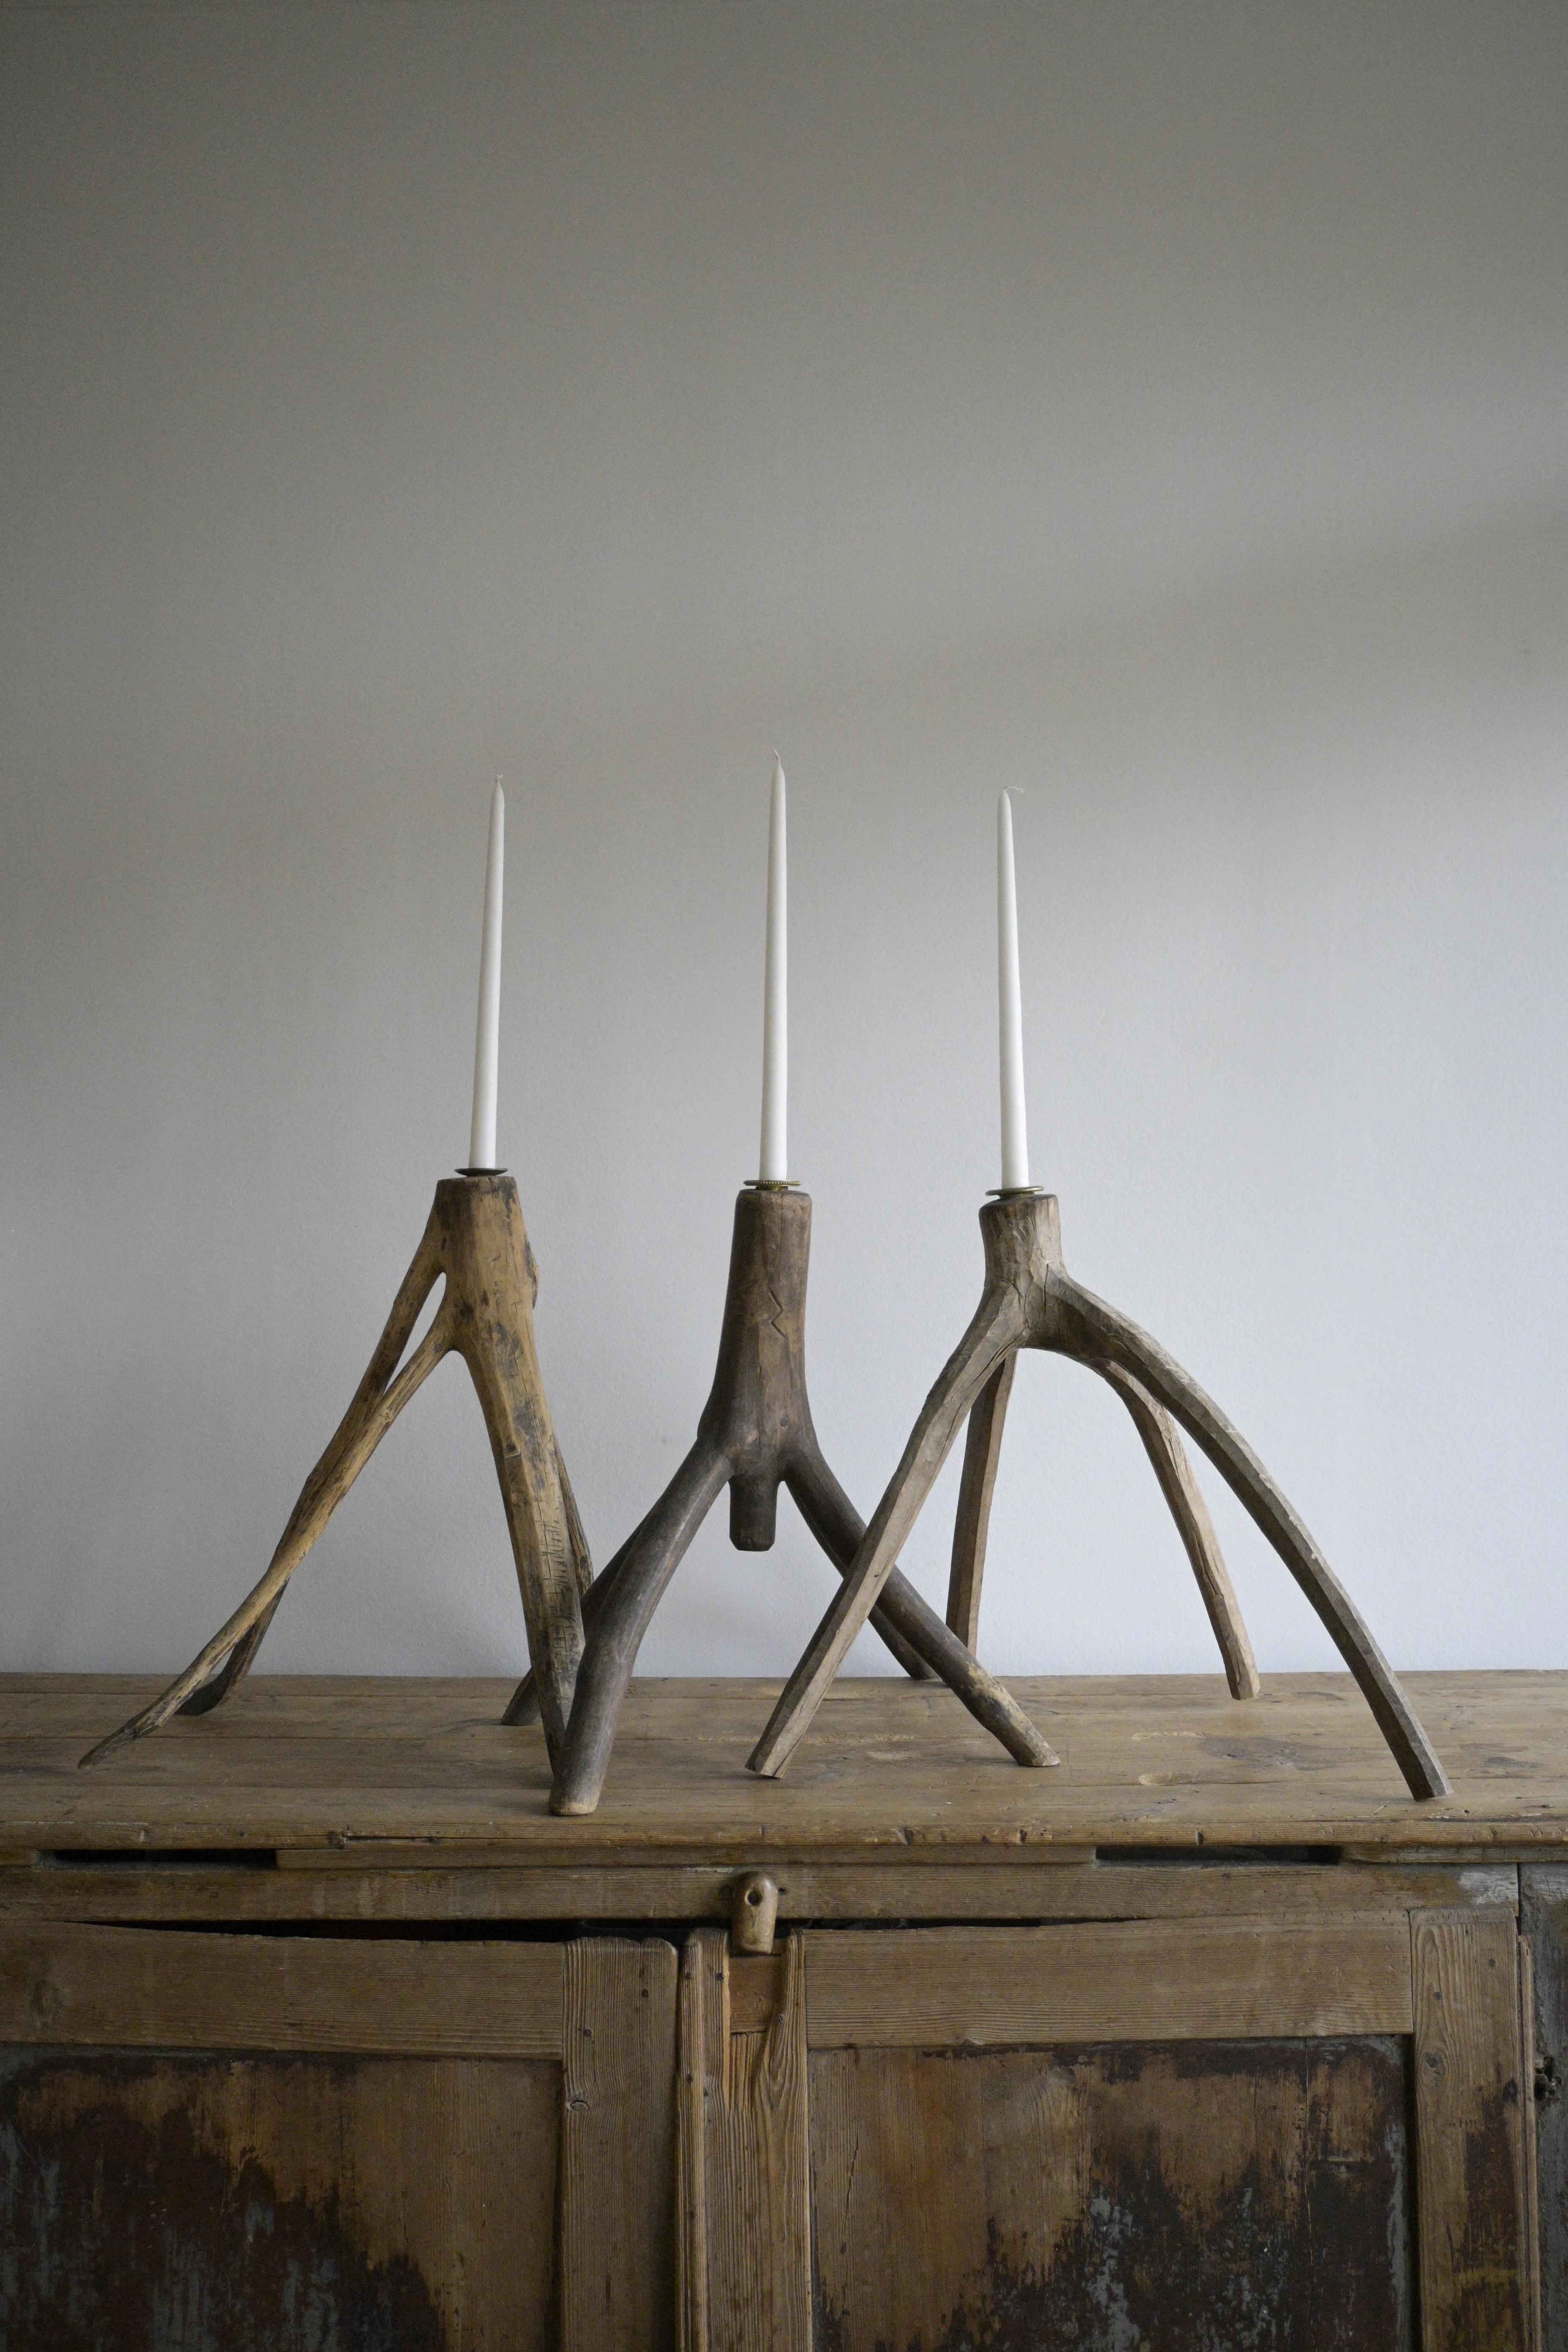 Set of Three Large Swedish Candlesticks, early 19th century

Parts from yarn swifters, called 